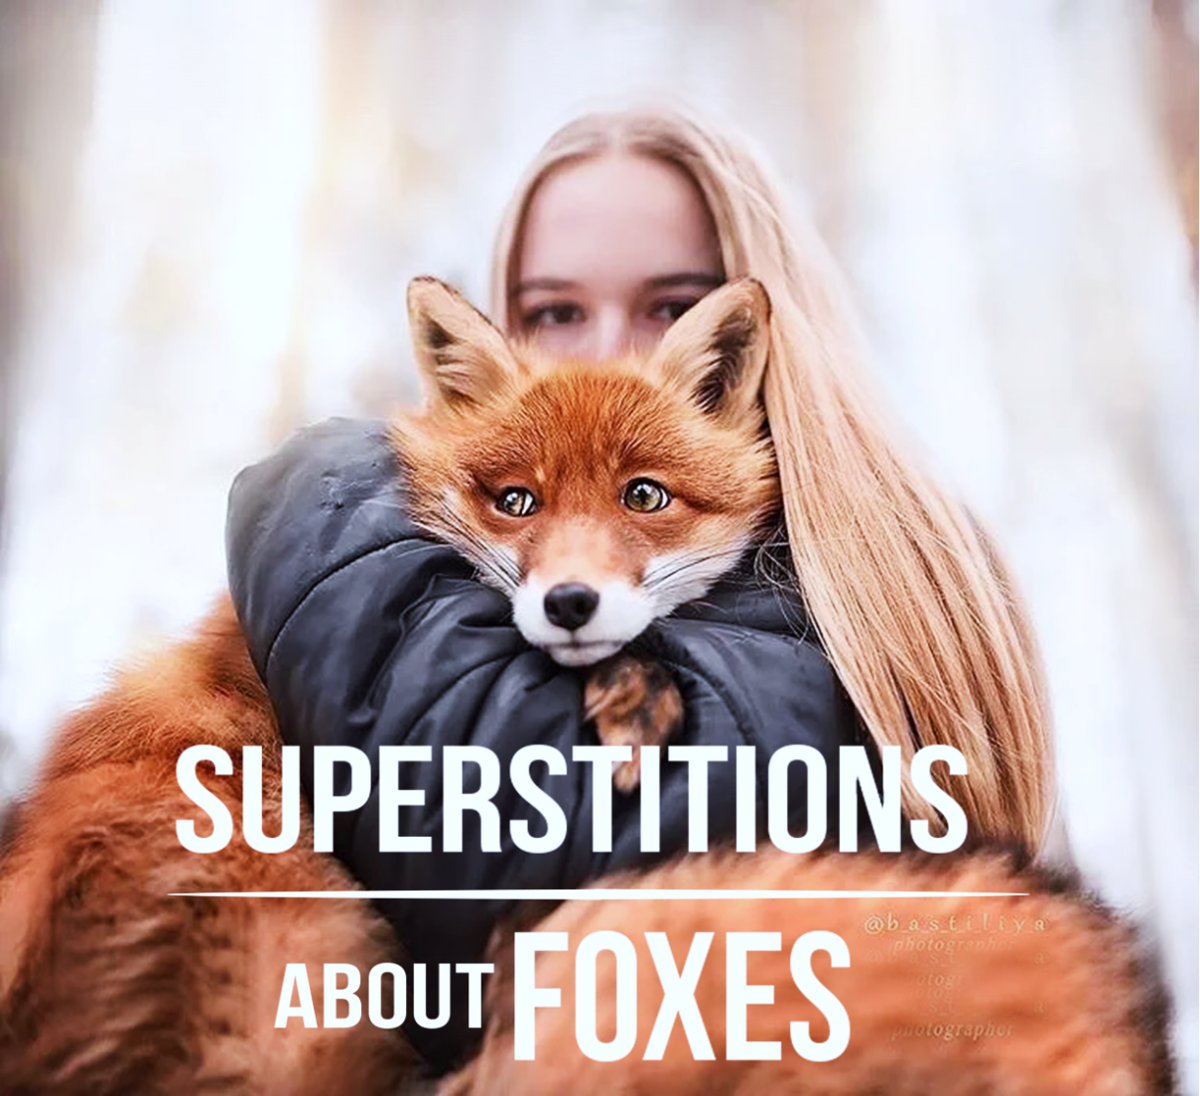 10 Superstitions About Foxes